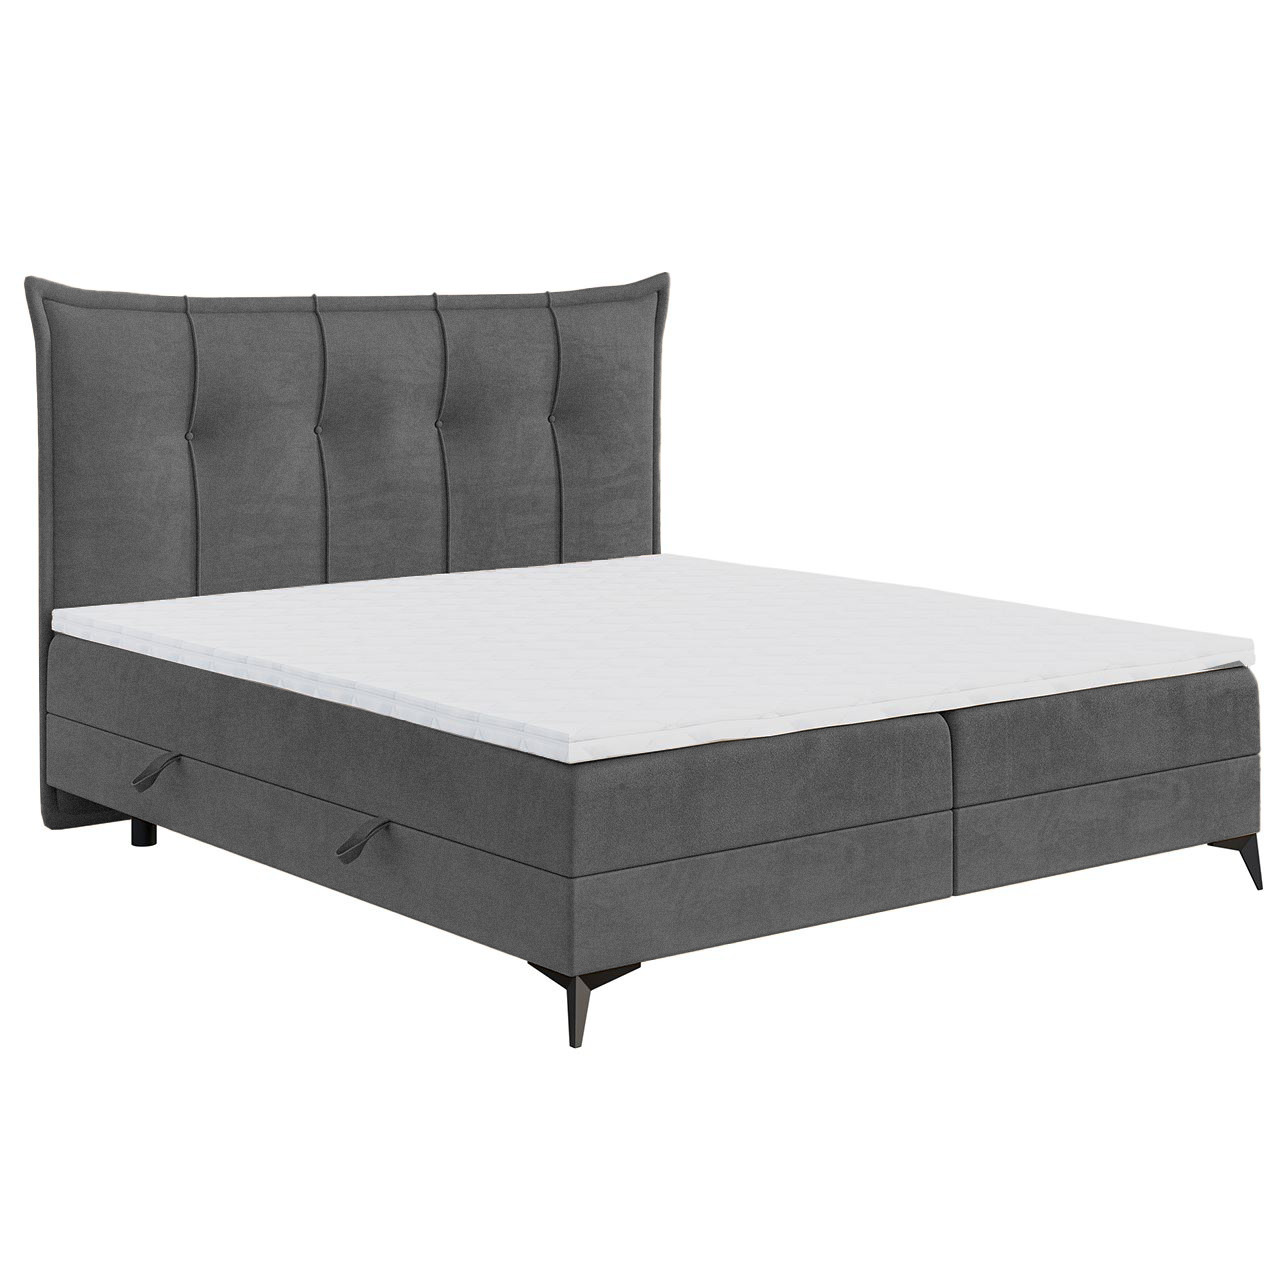 Upholstered bed FOX 140x200 monolith 92